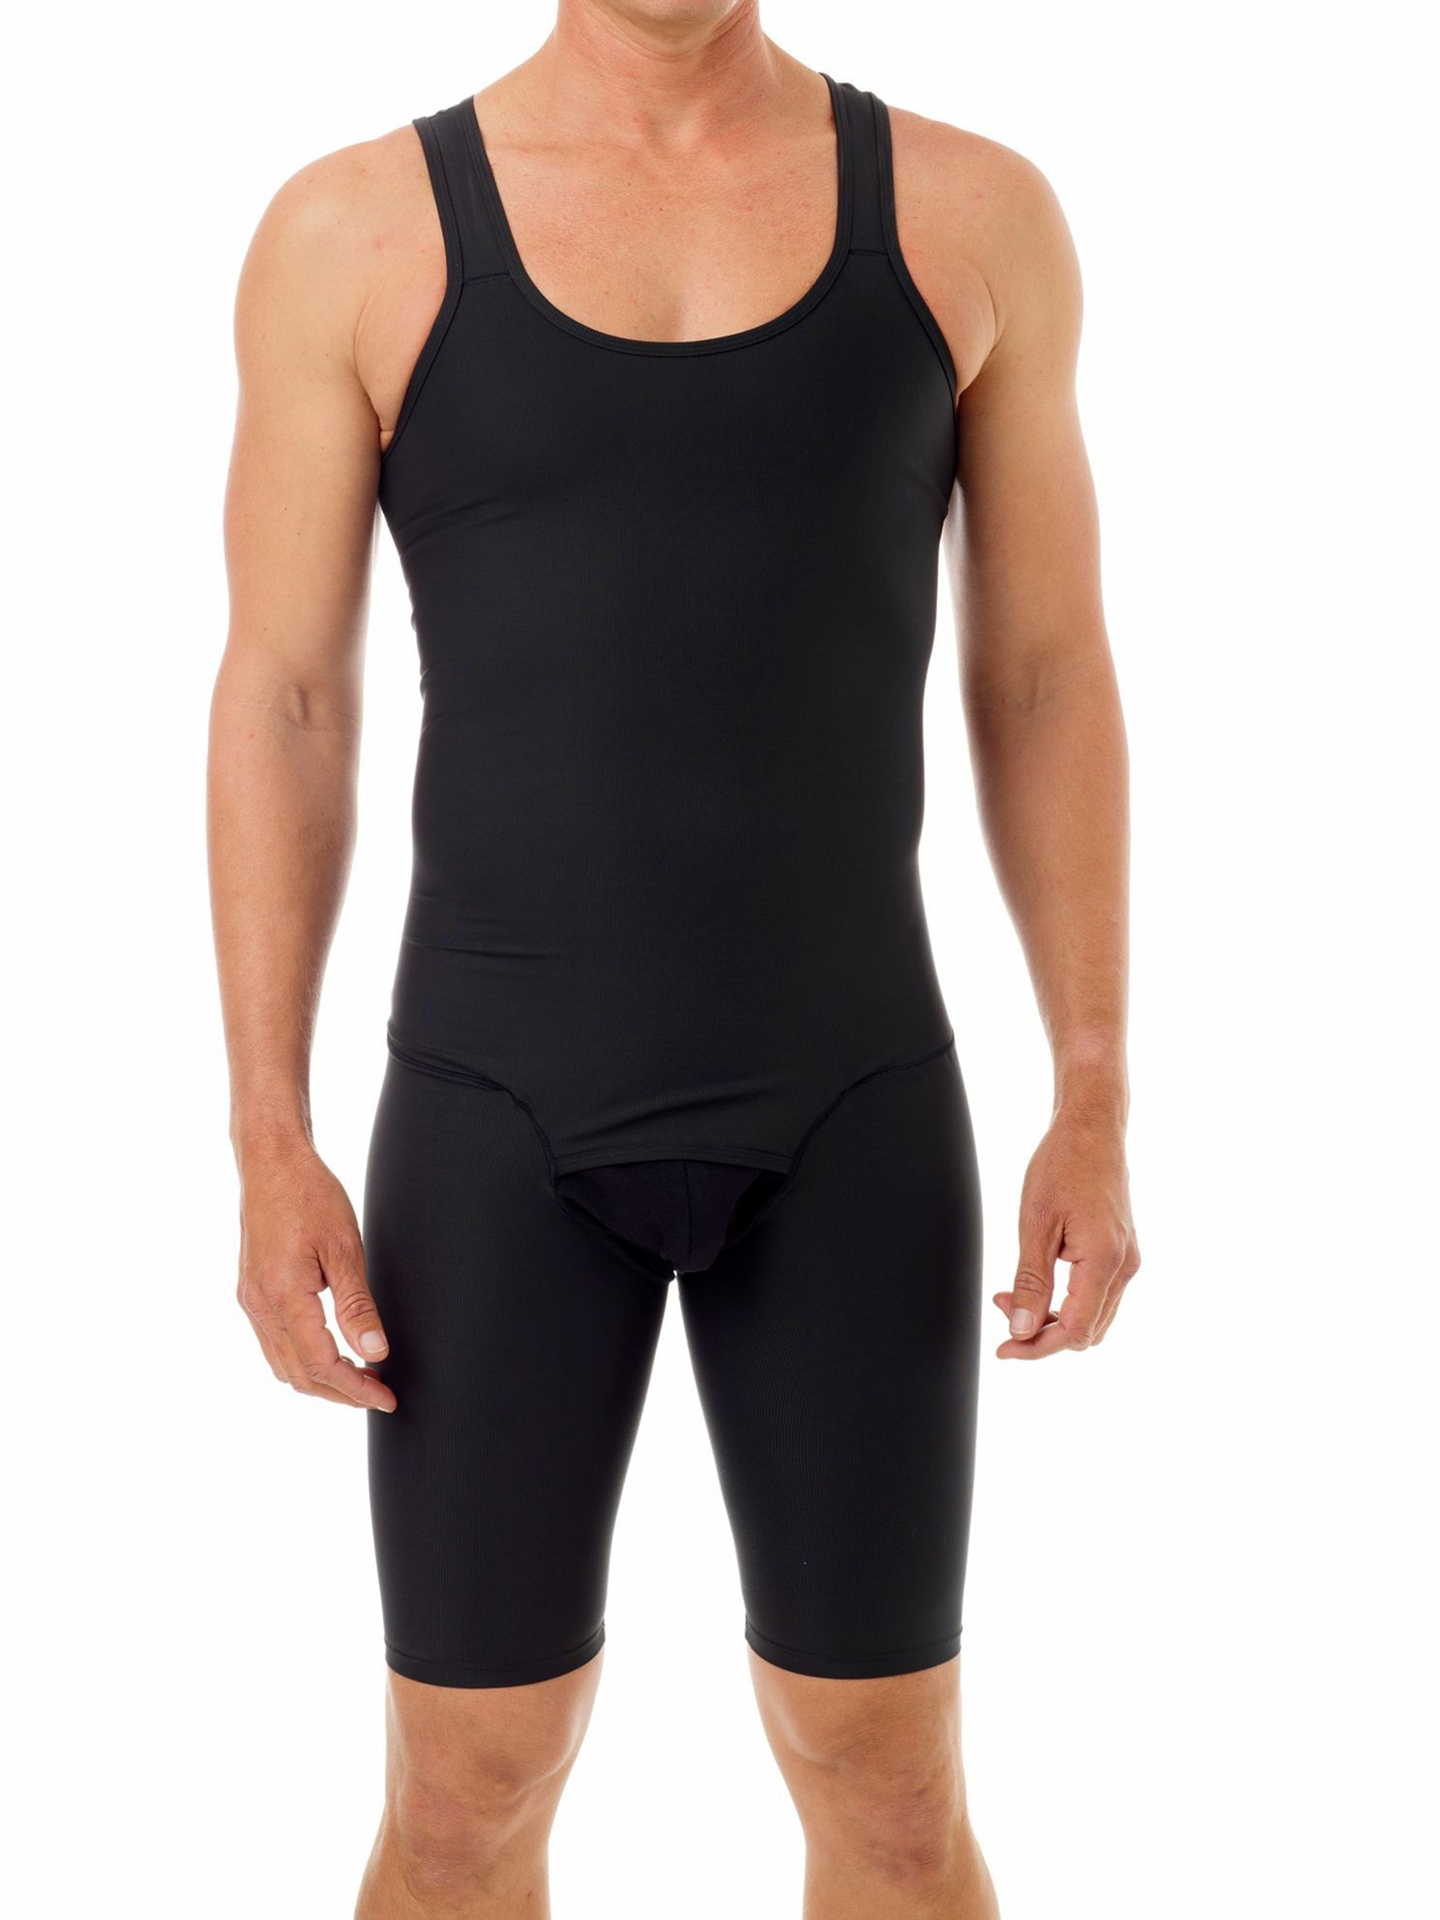 Underworks Mens Compression Bodysuit Shaper - Girdle for Gynecomastia Belly  Fat and Thighs - No Rear Zipper - Black - S